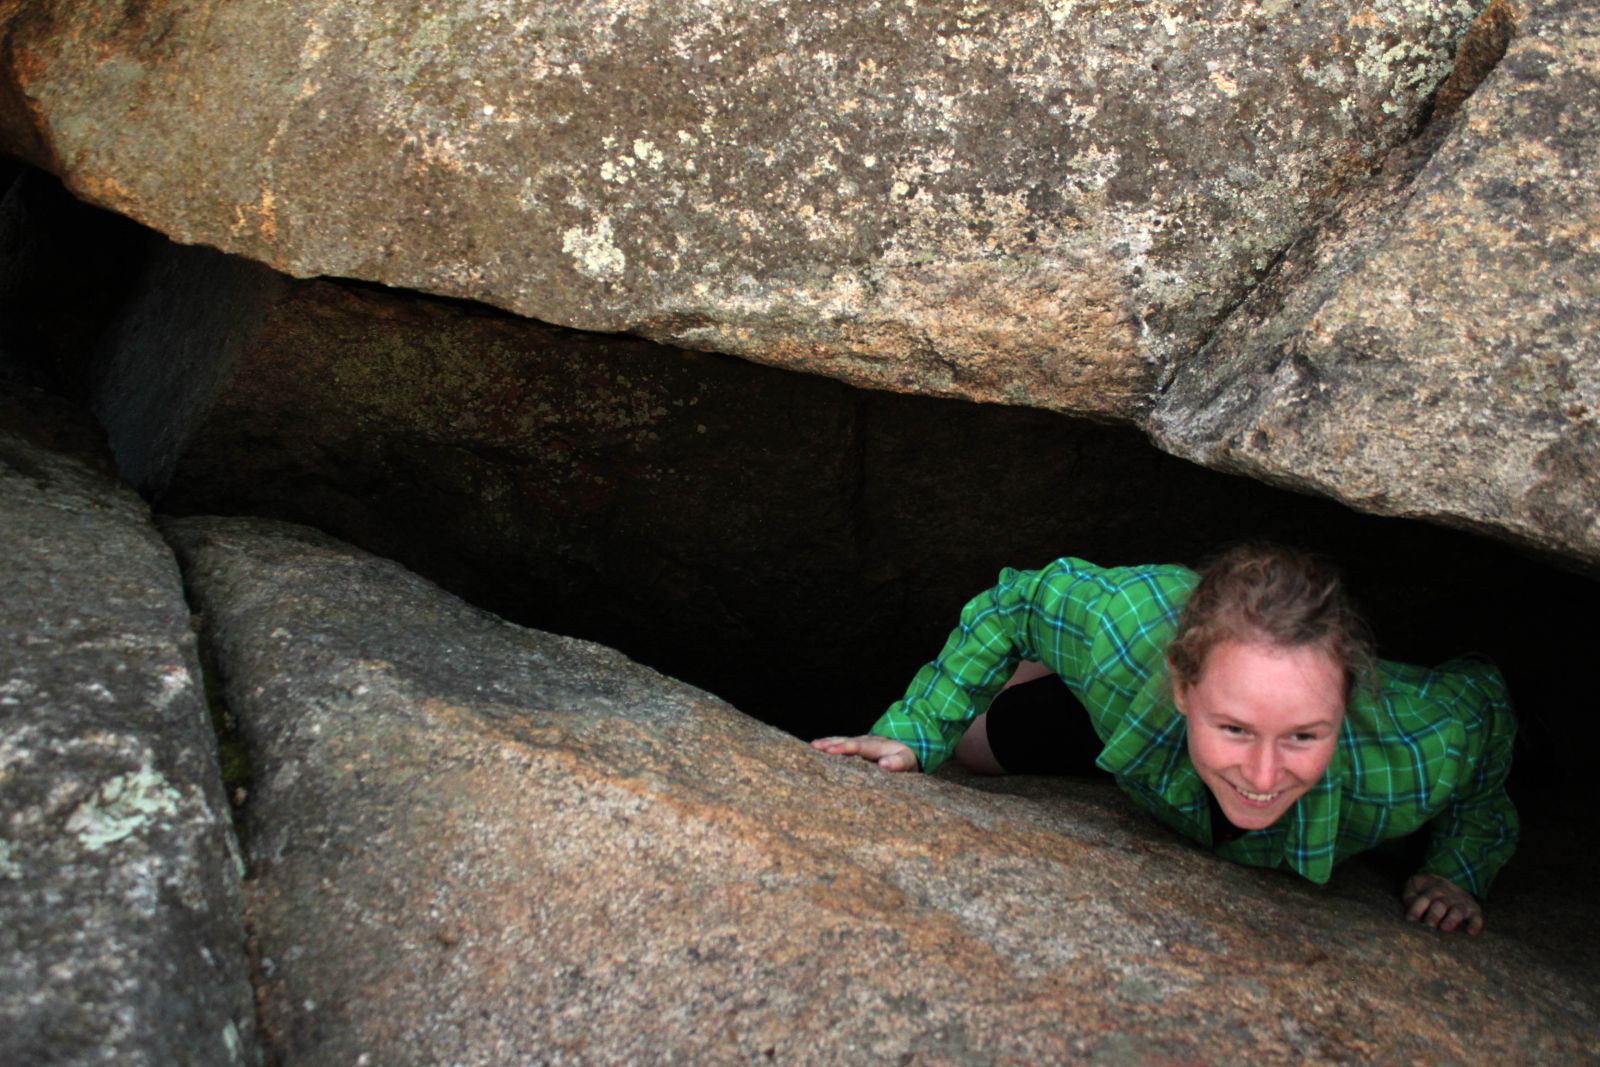 Emilee exits the cave-like crack in the ledge.